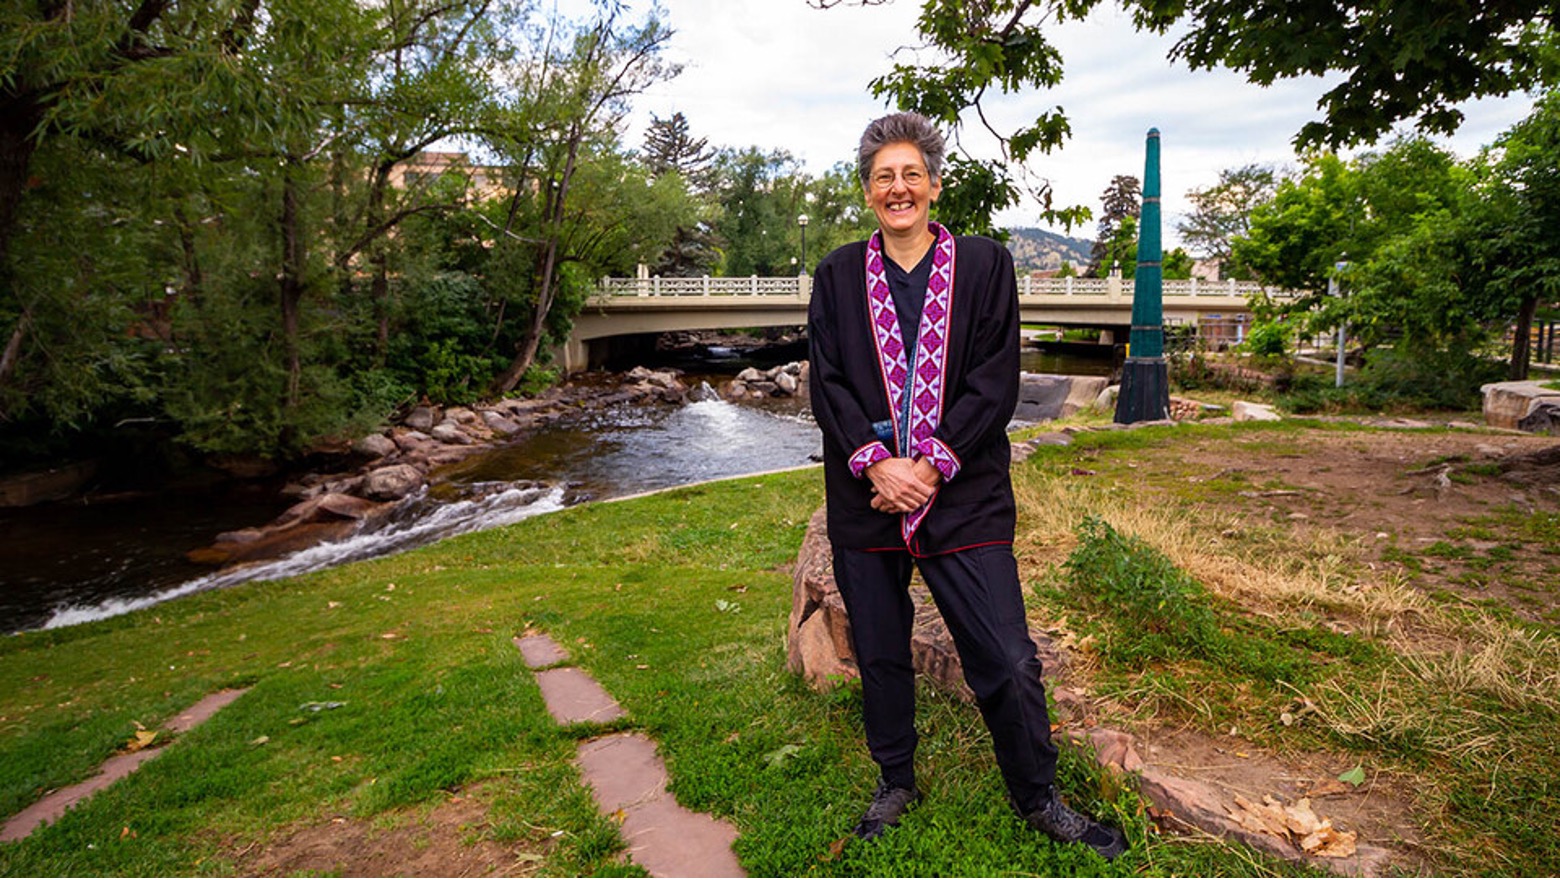 Sarah Michaels, professor of political science at Nebraska and a faculty fellow with the University of Nebraska Public Policy Center, smiles and stands outside by a creek.